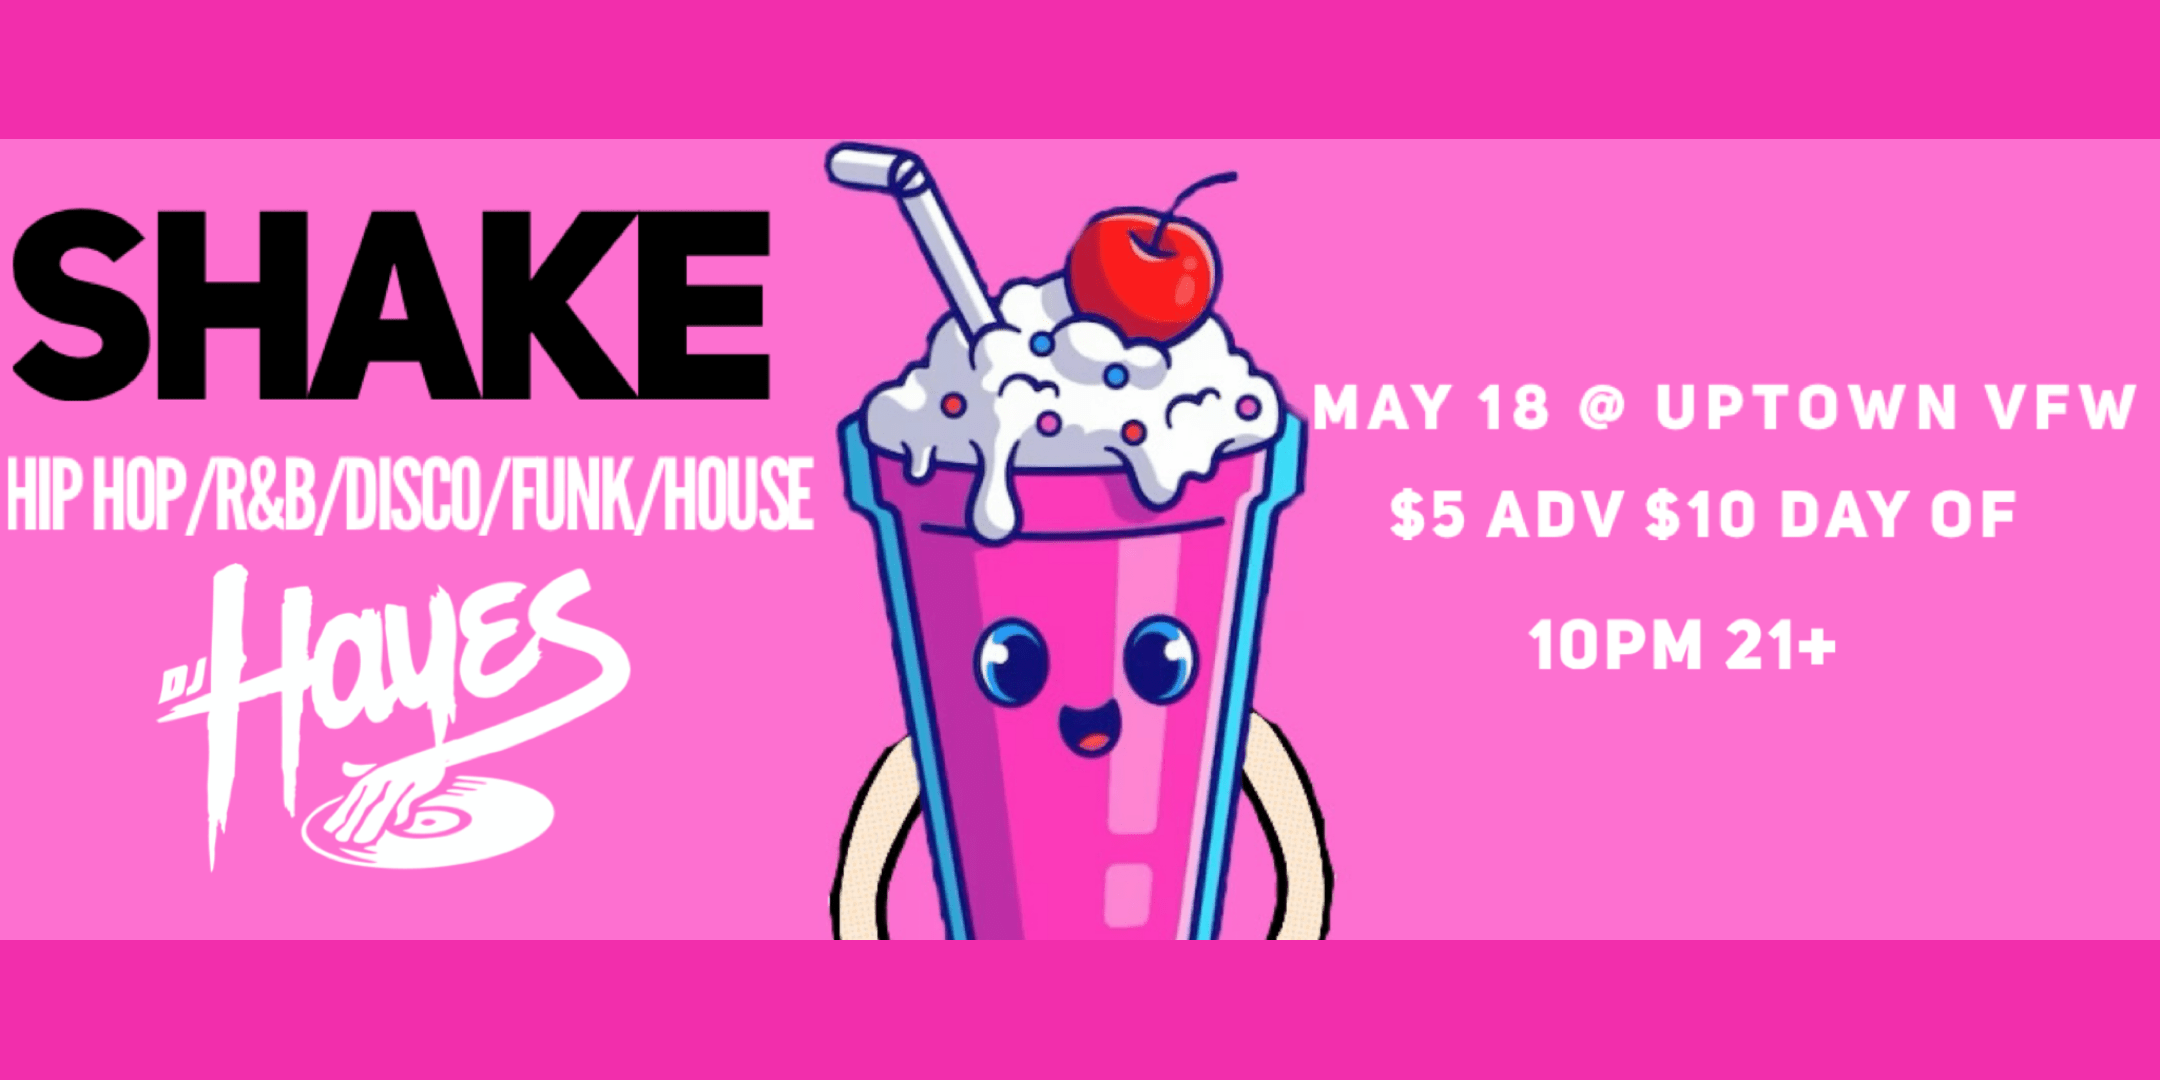 DJ Hayes Presents: Shake Hip Hop / R&B / Disco / Funk / House Saturday, May 18 James Ballentine "Uptown" VFW Post 246 Doors 10:00pm :: Music 10:00pm :: 21+ $5 ADV / $10 DOS TICKETS ON SALE NOW